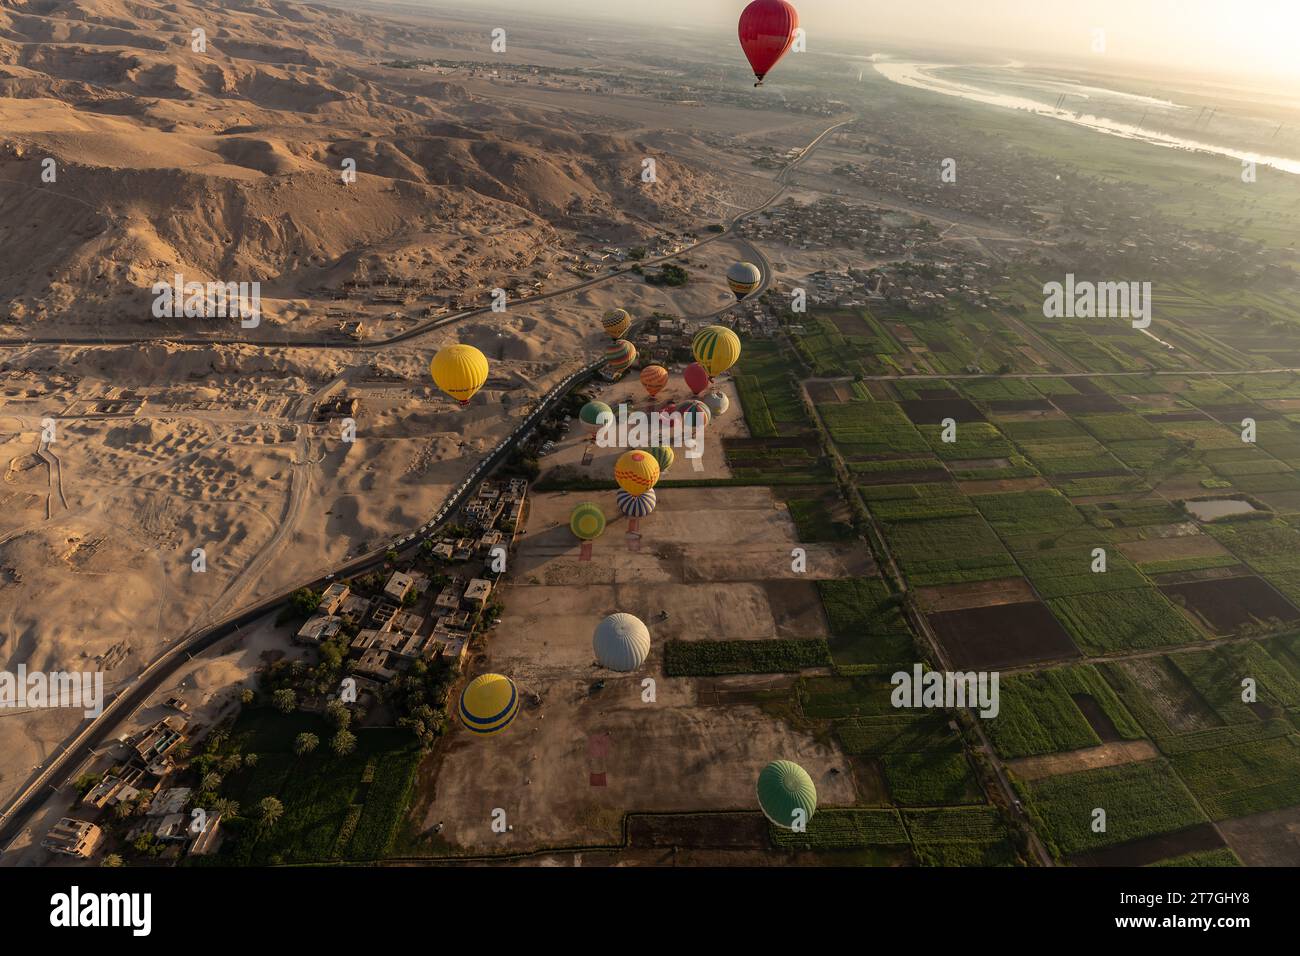 Aerial view of hot air balloons flying over desert landscape of Valley of the kings and farms in the fertile Nile River valley Stock Photo